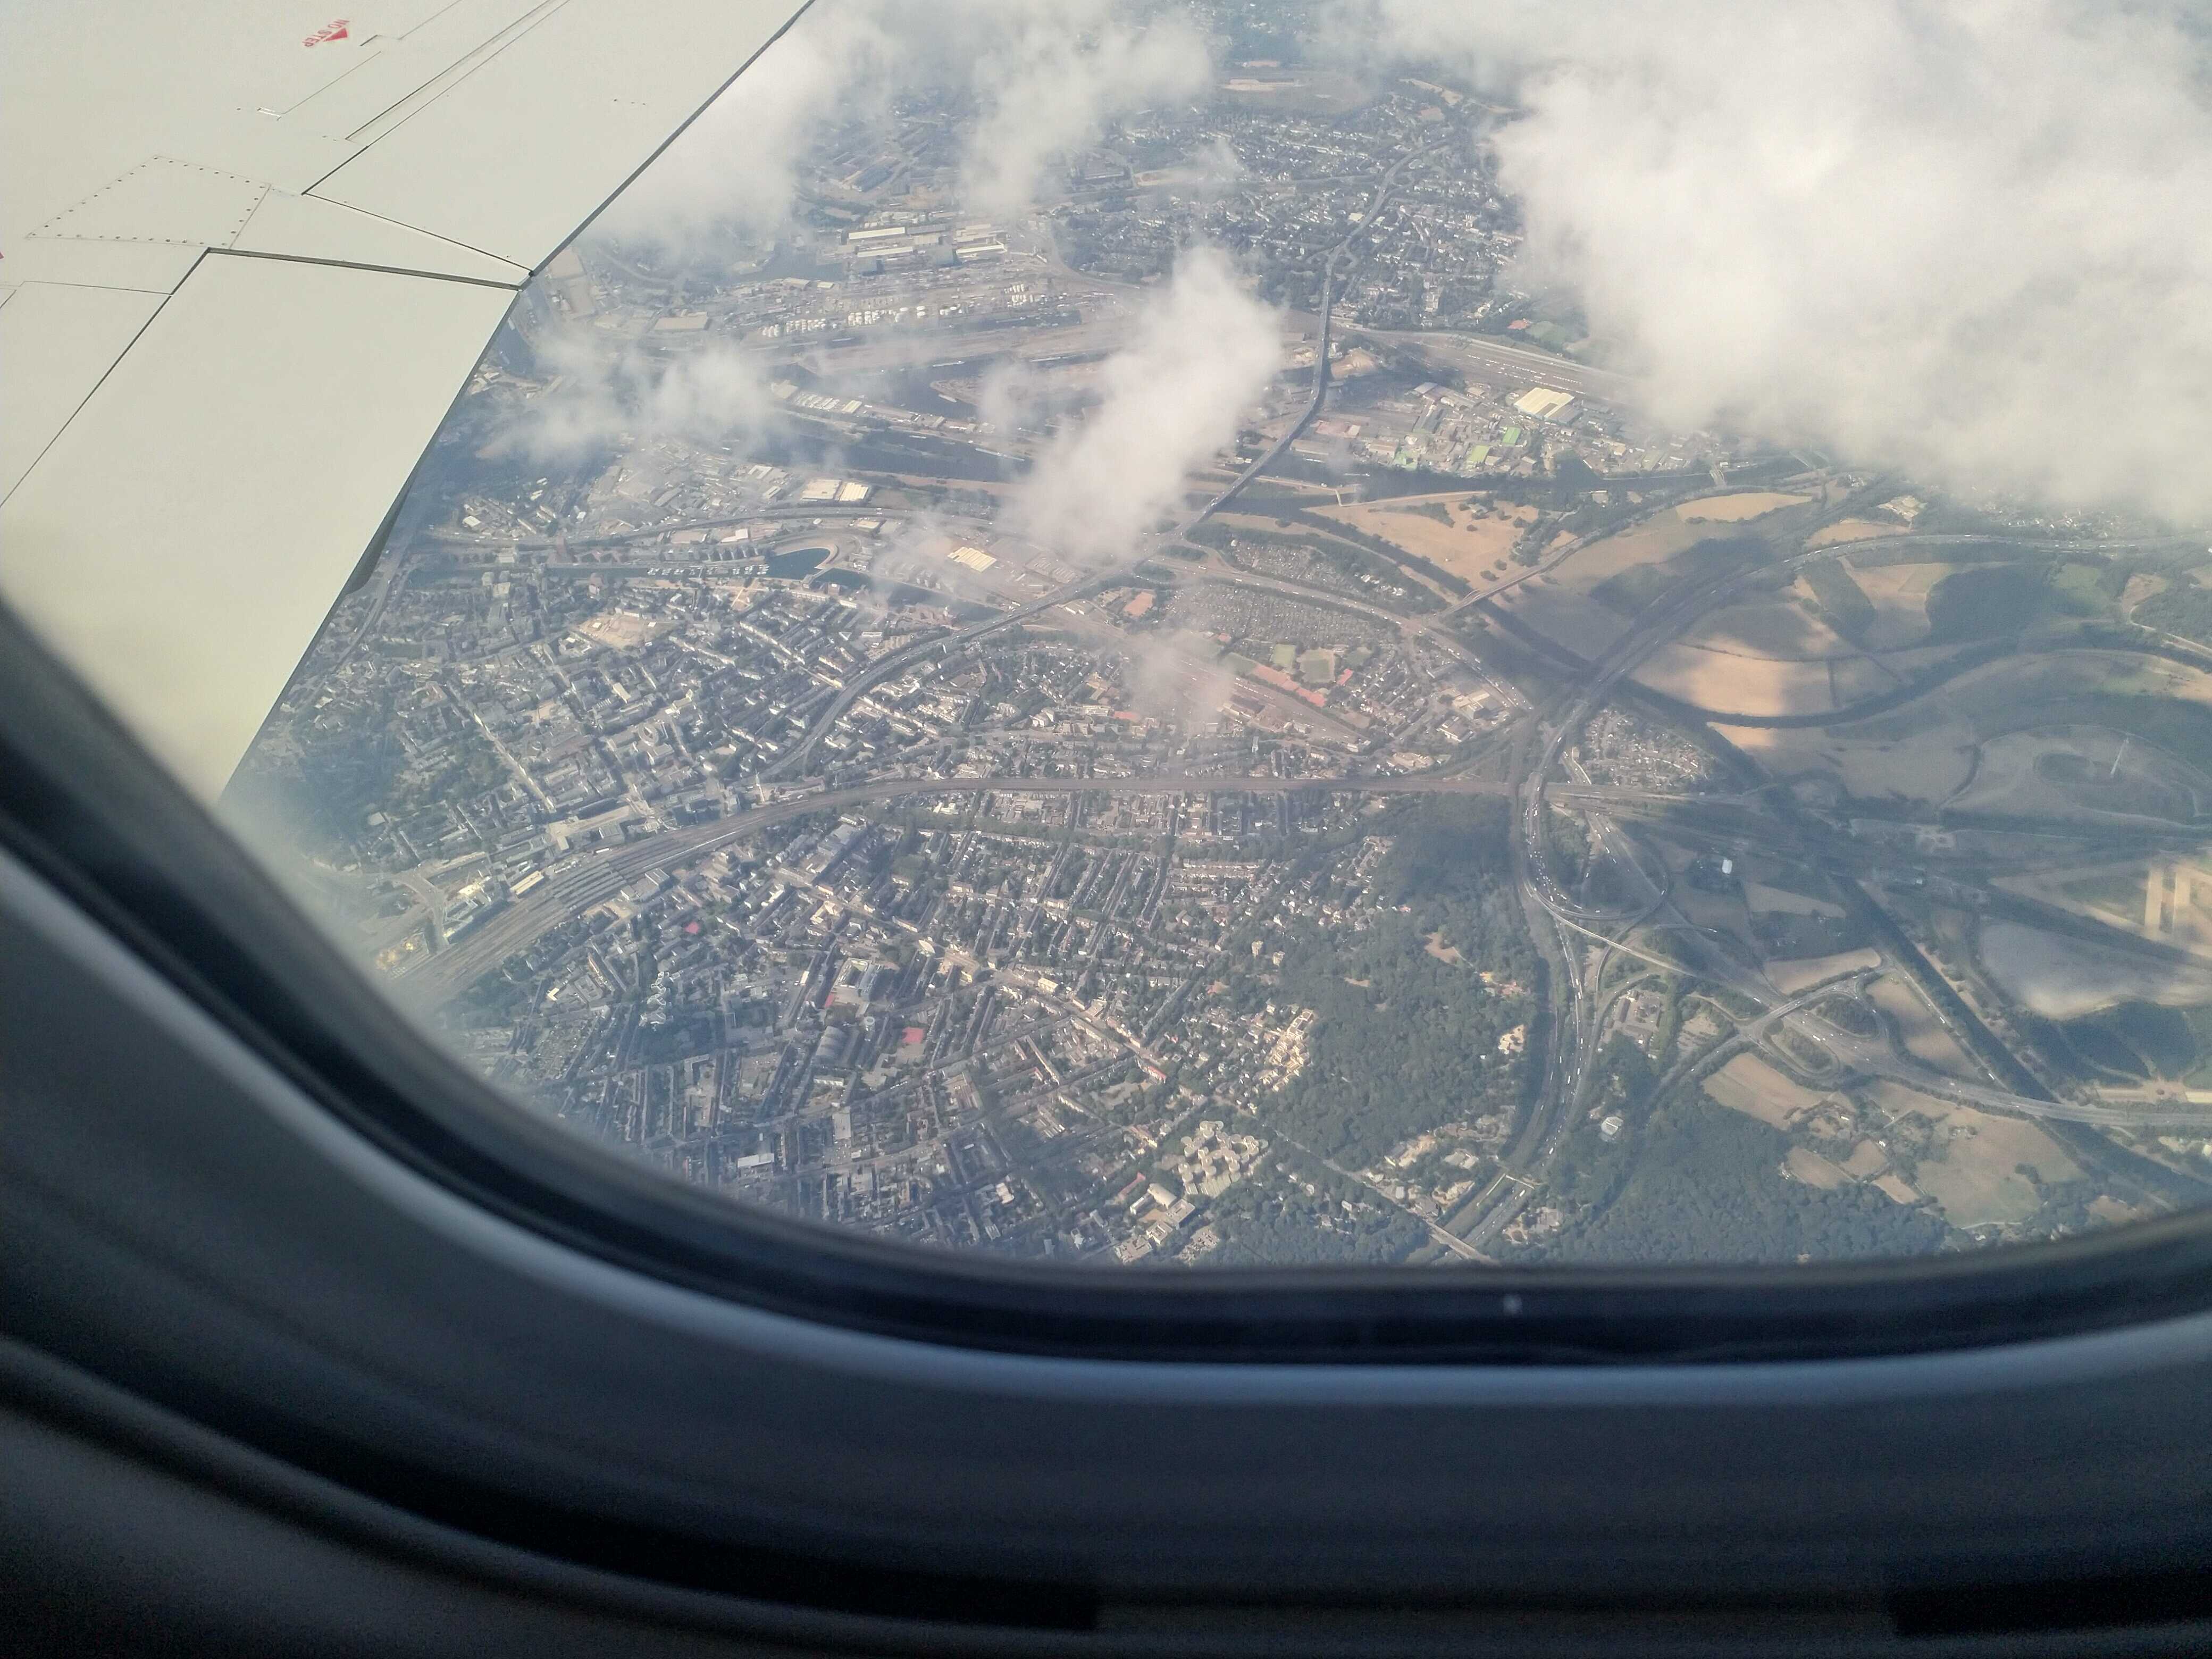 Duisburg from the air (I can see my office!).